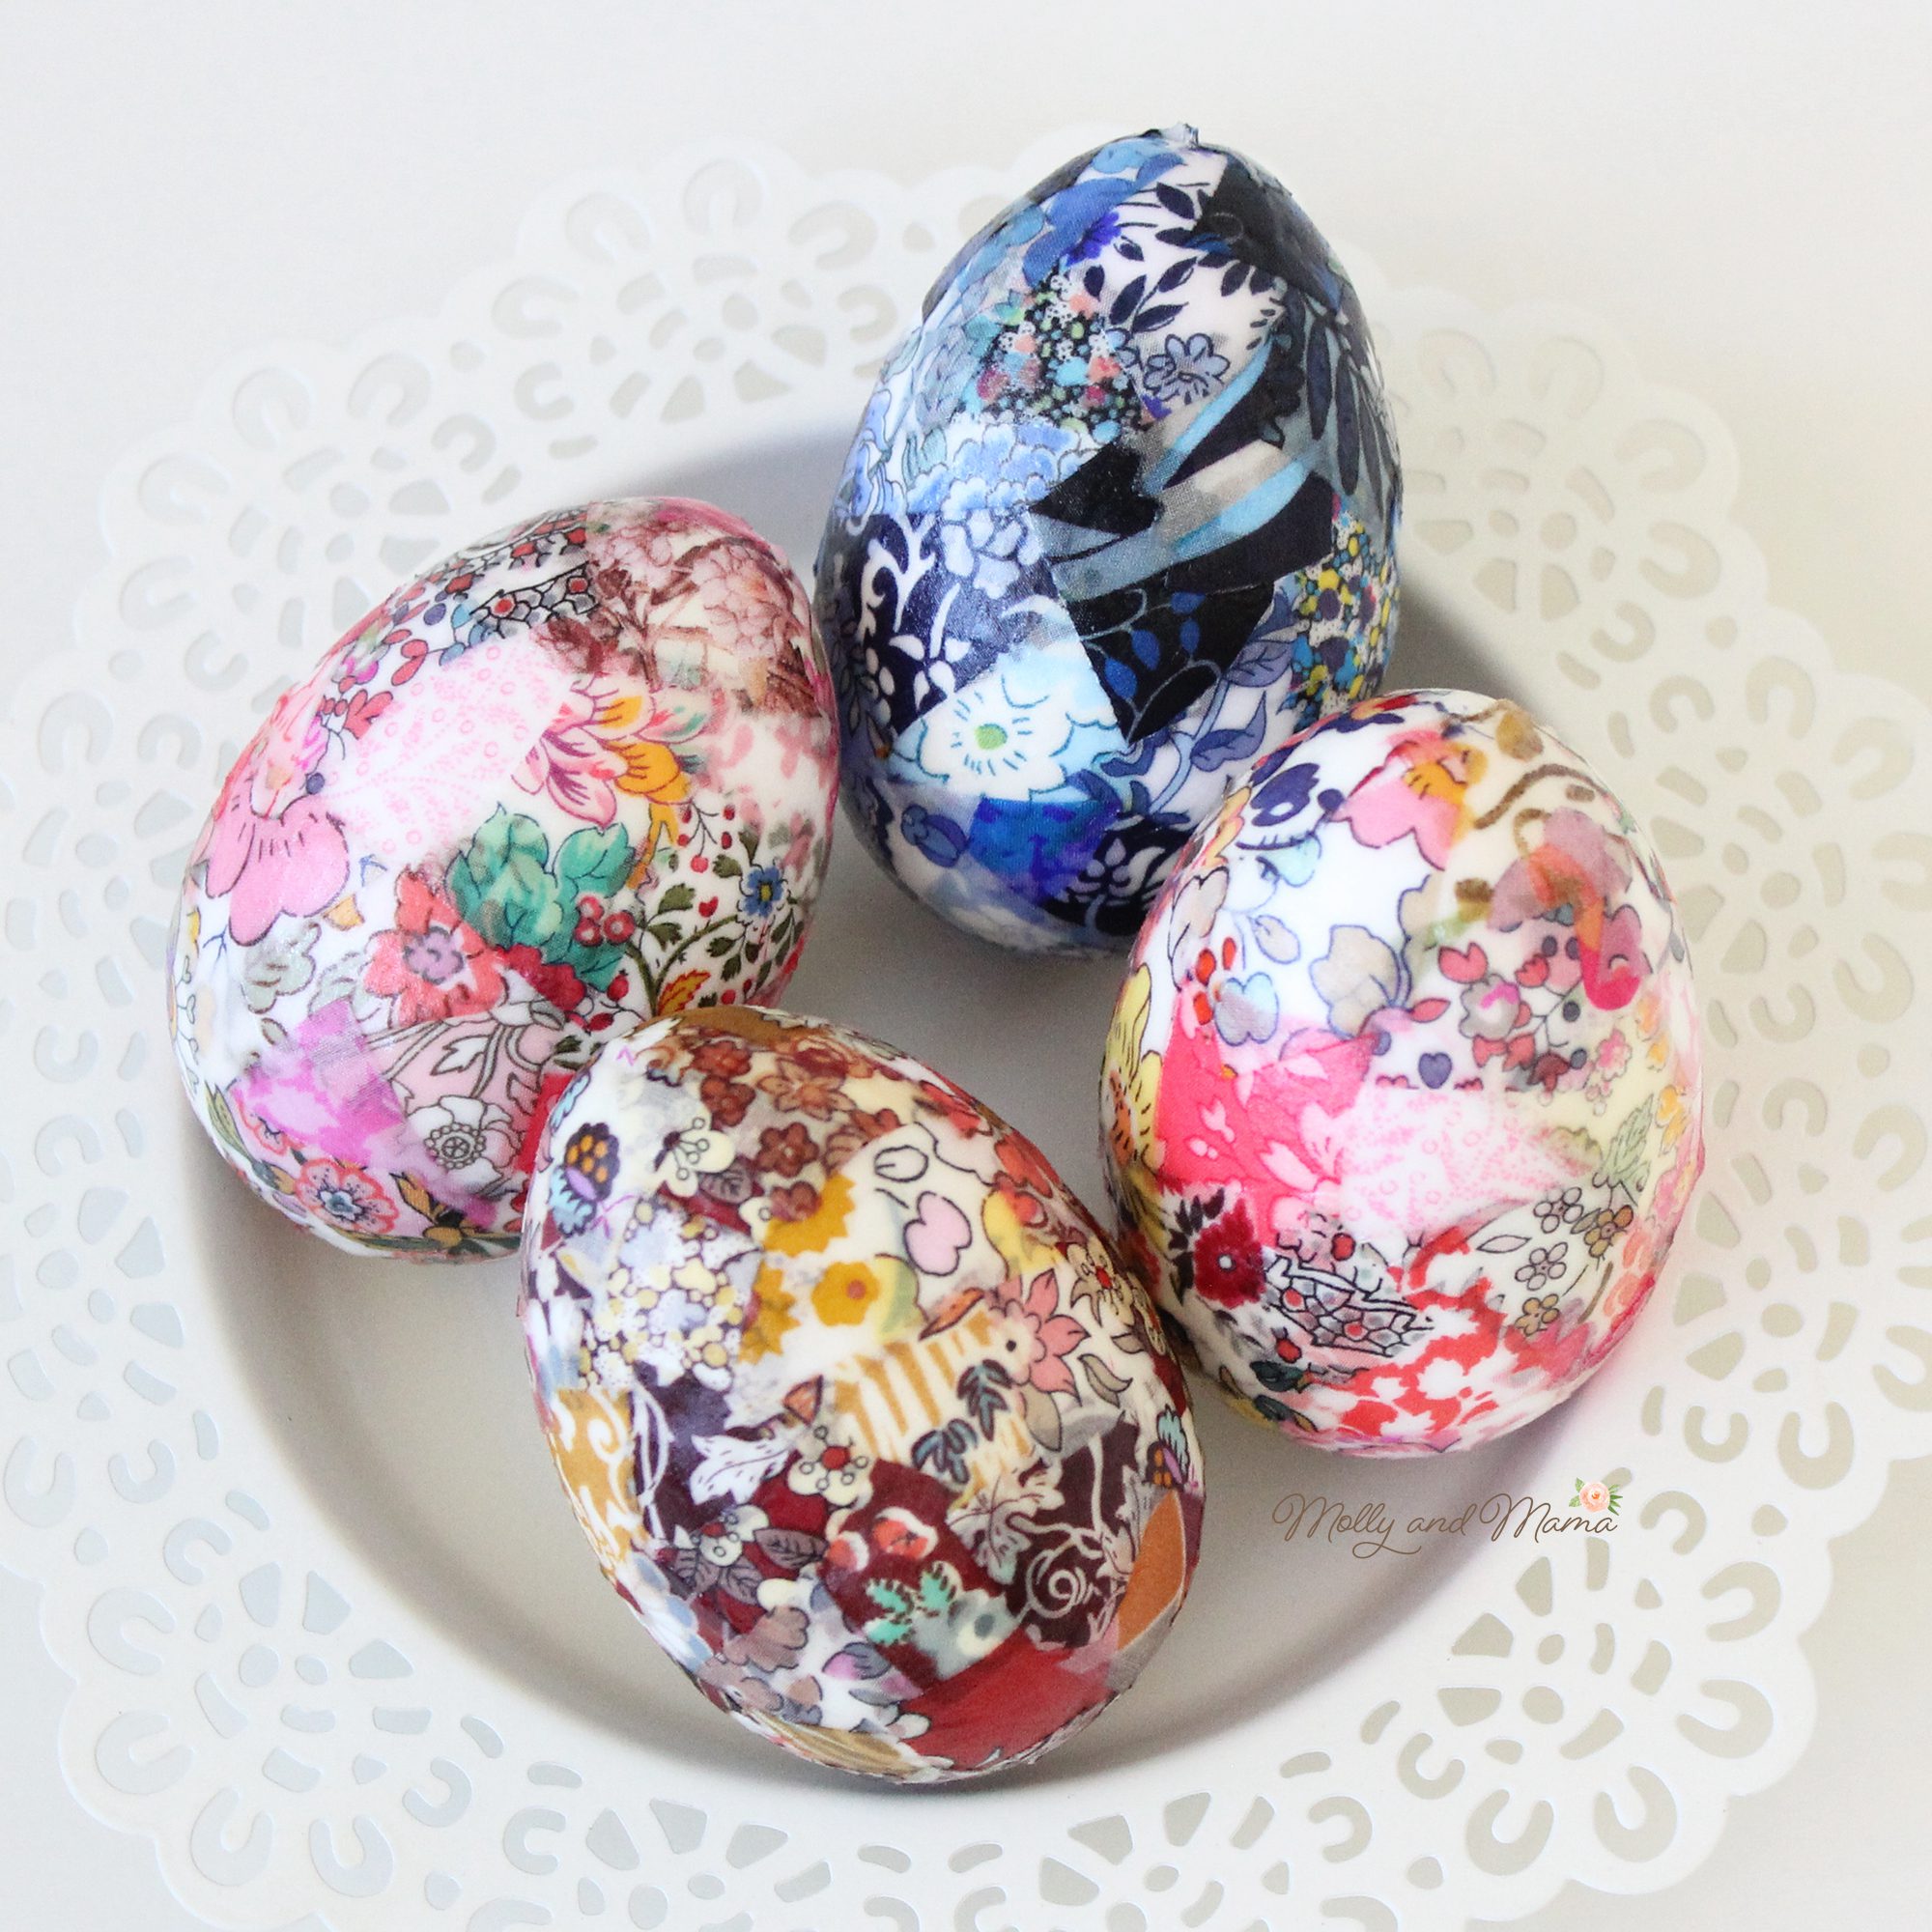 How To Make Your Own Easter Eggs